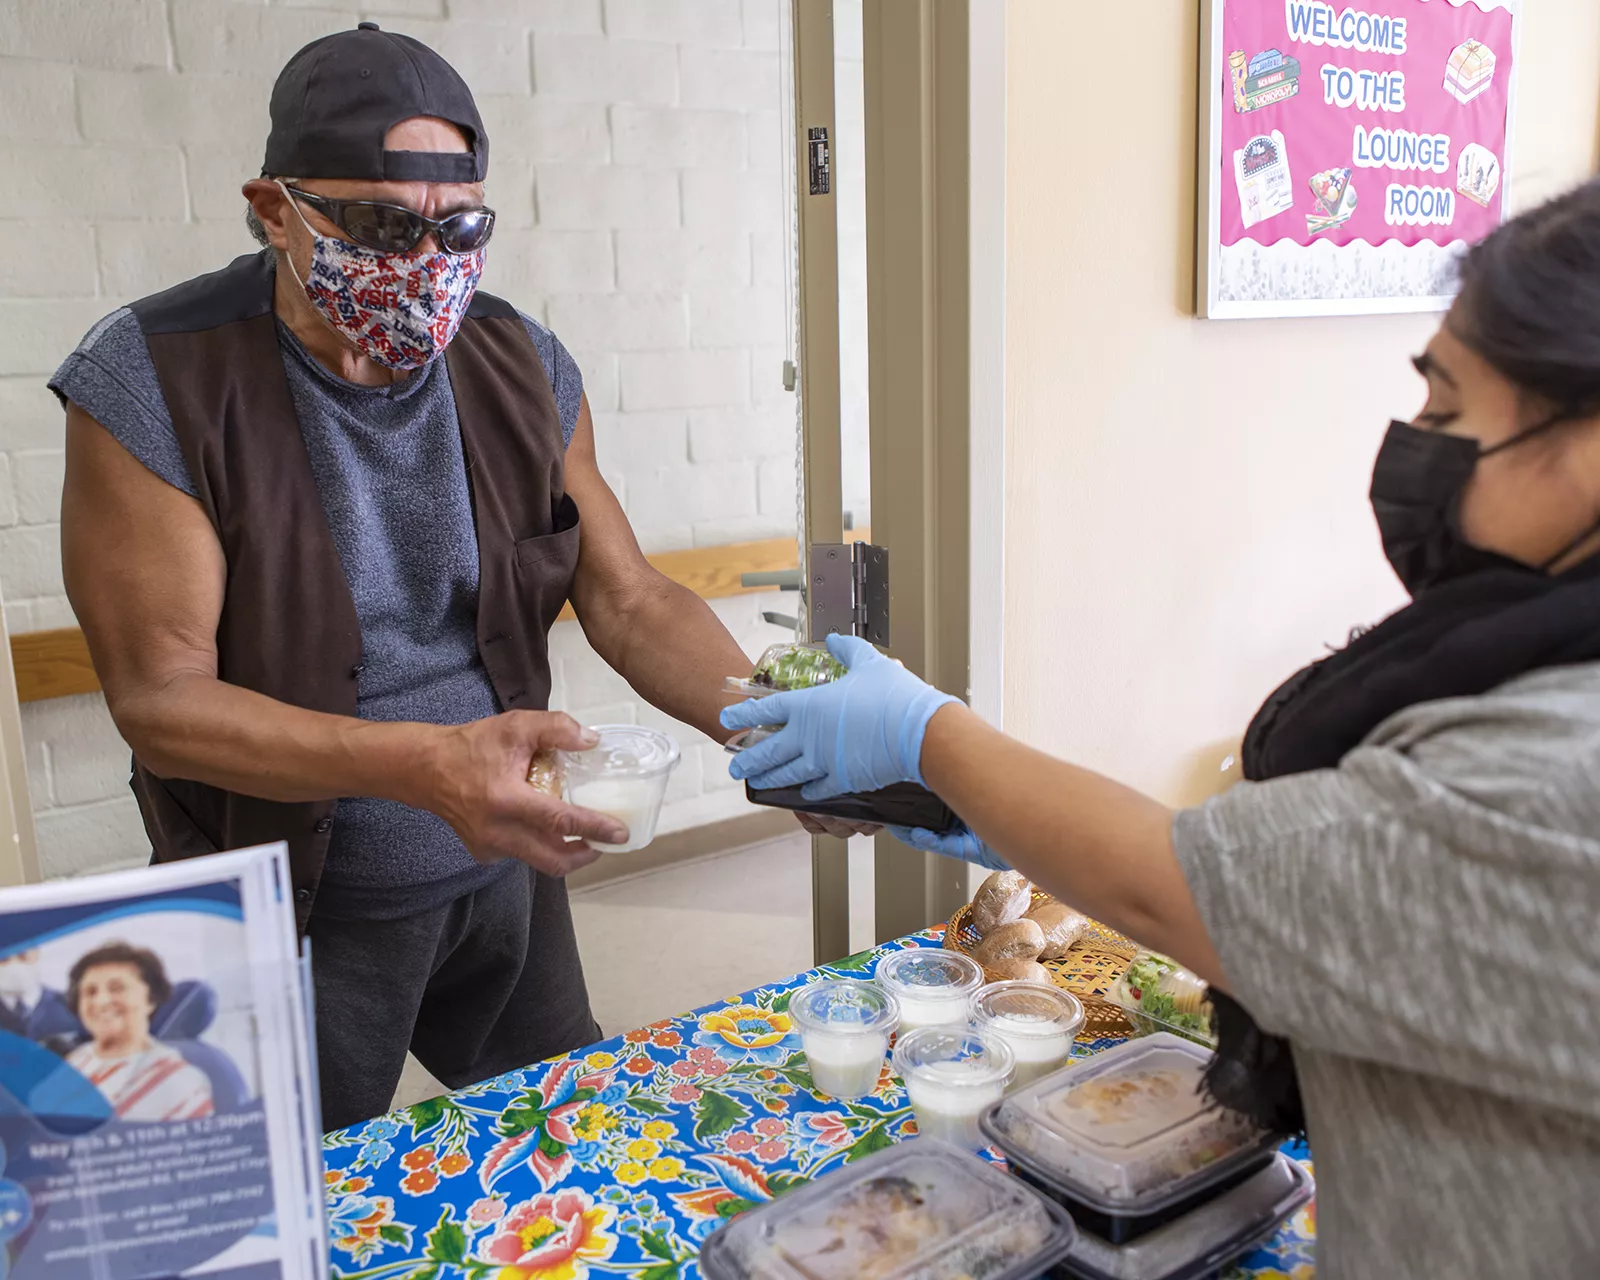 Man receiving meal from food program